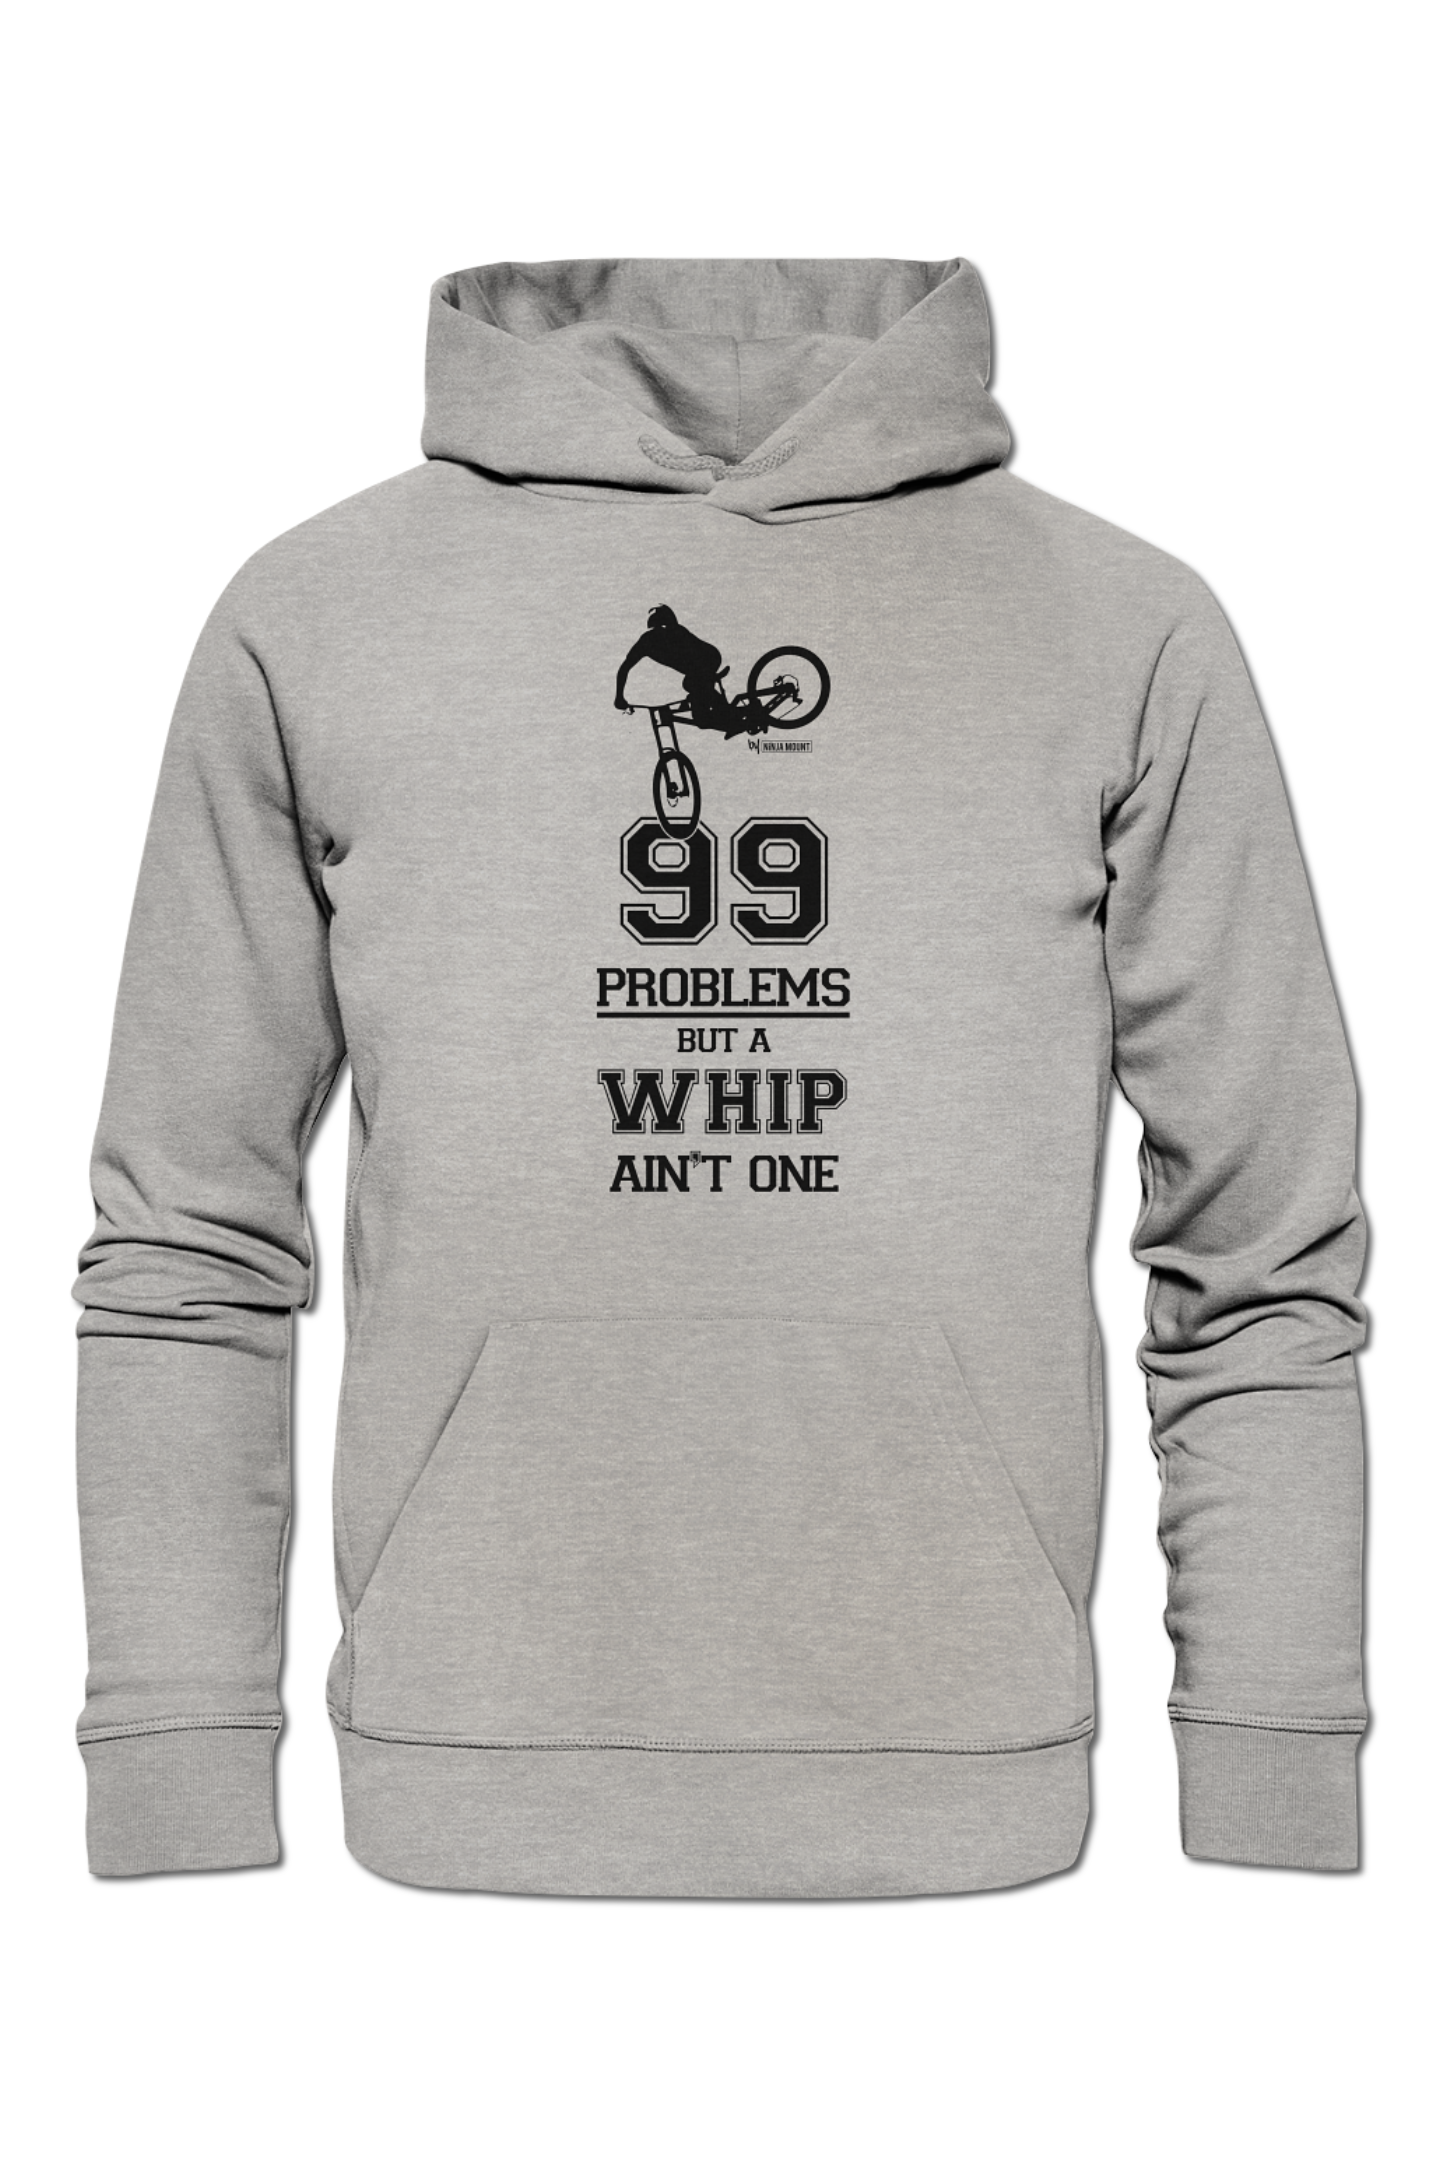 99 Problems but a Whip ain't One - Organic Hoodie - HEATHER GREY